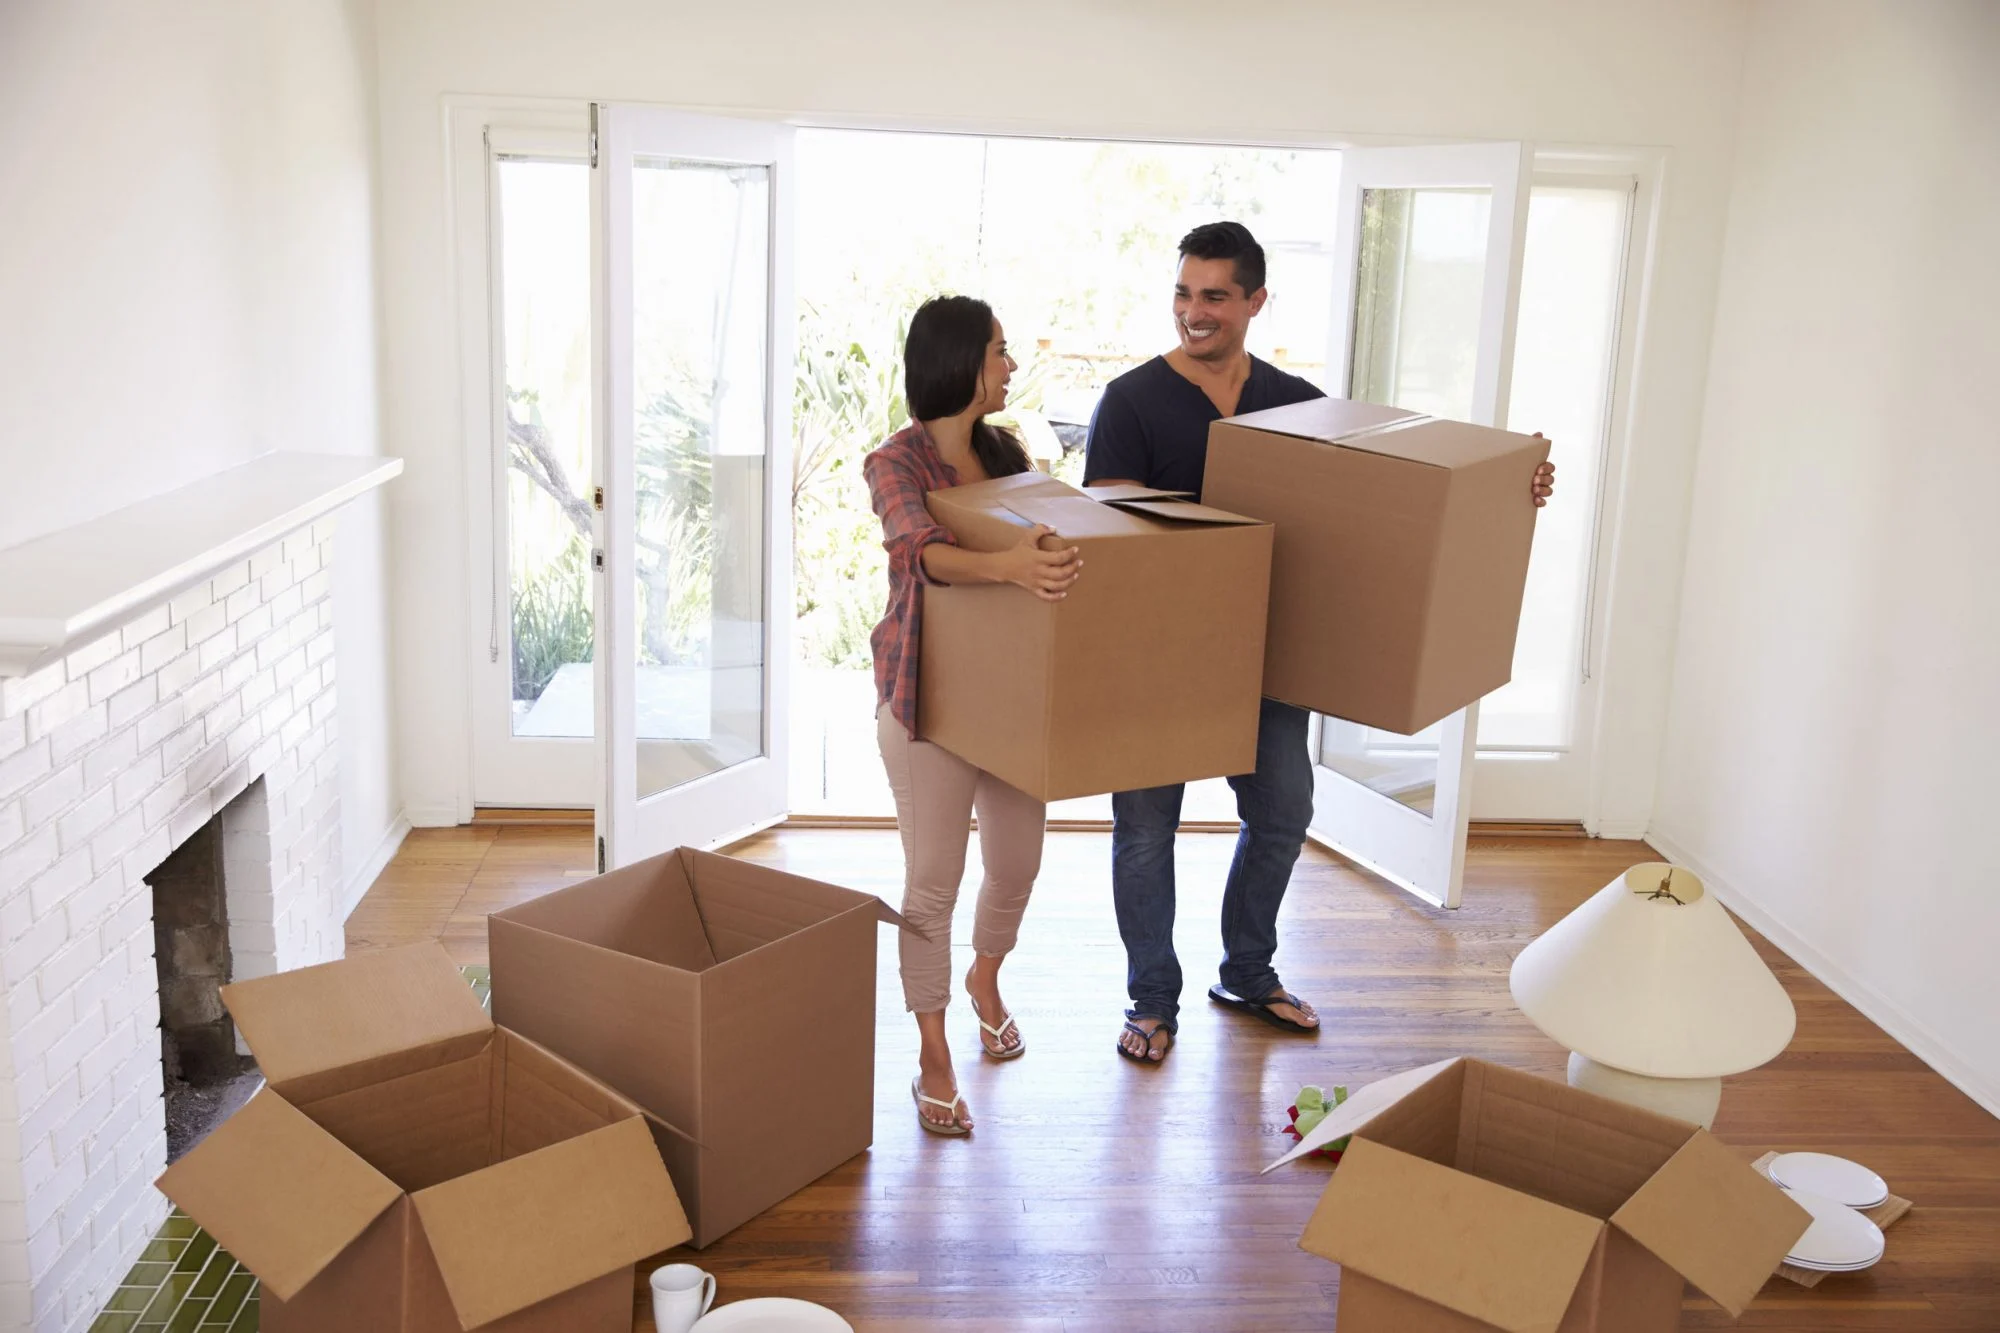 Moving House Checklist